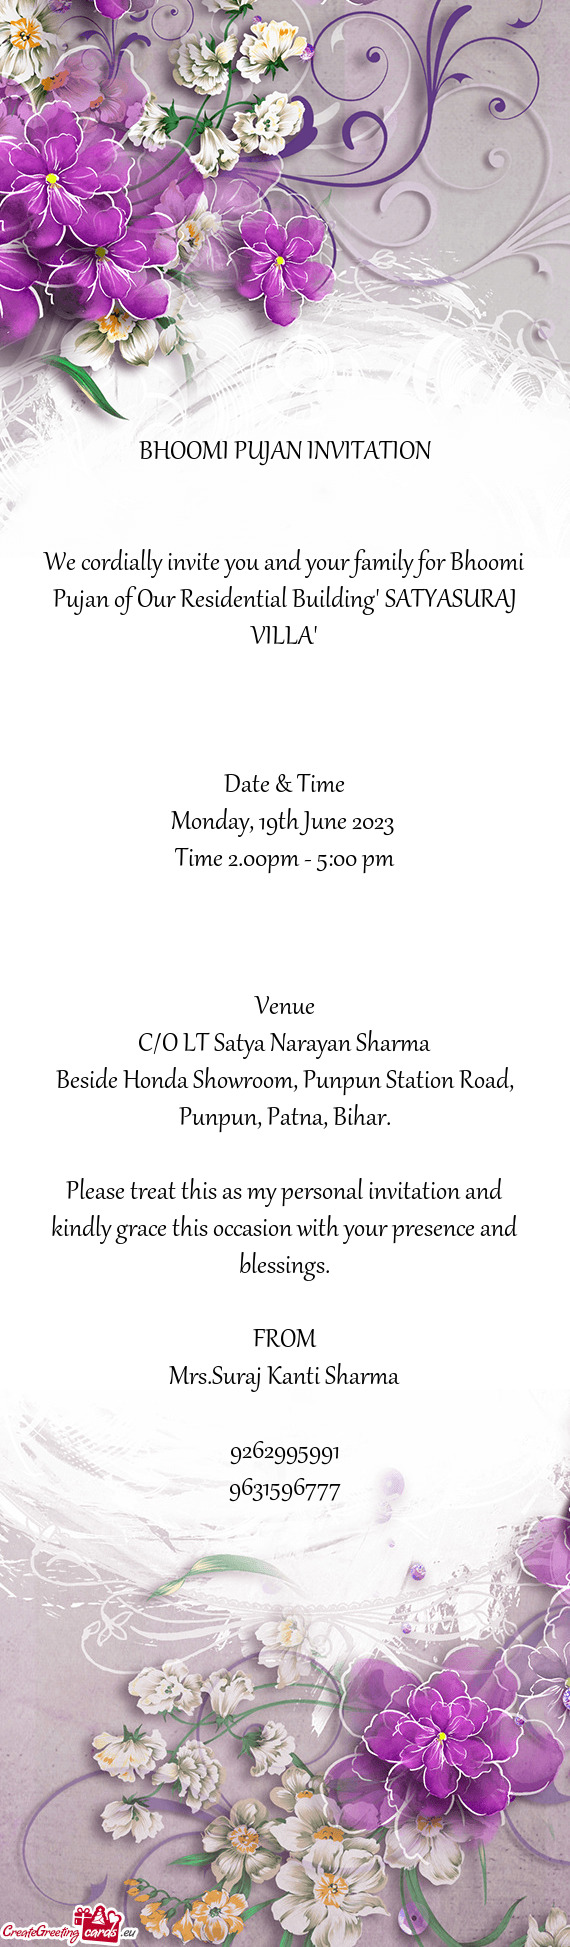 We cordially invite you and your family for Bhoomi Pujan of Our Residential Building" SATYASURAJ VIL